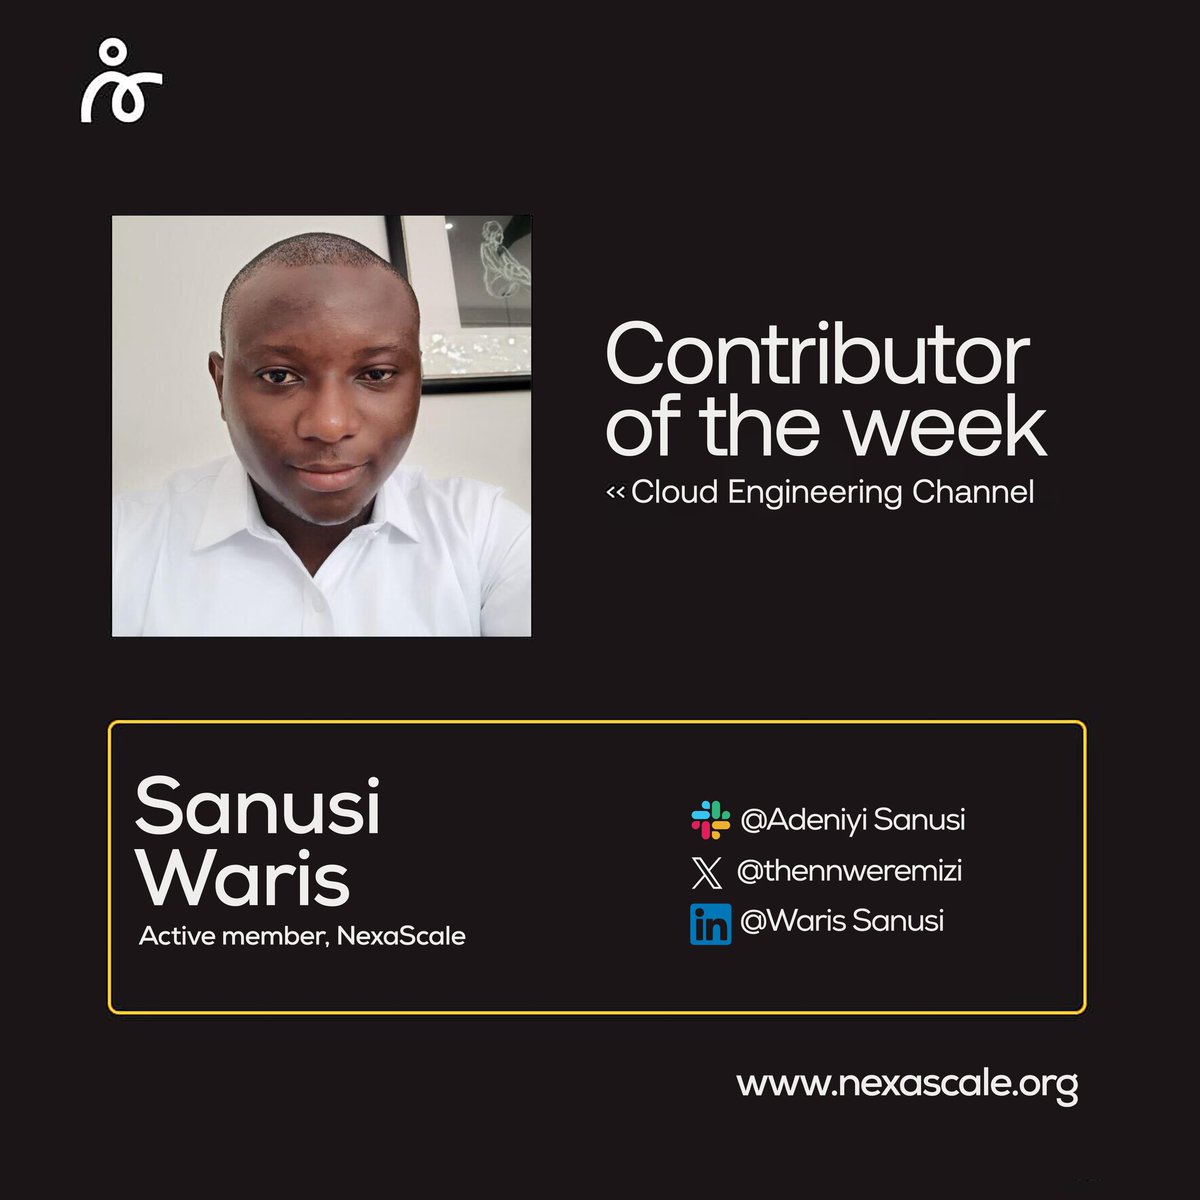 Congratulations to @sanusi_waris for being the most engaging person on the NexaScale Cloud Engineering channel. He's been so engaging, knowledgeable, and always willing to lend his voice. He is a great role model for people in Tech, and we're lucky to have him in our community.